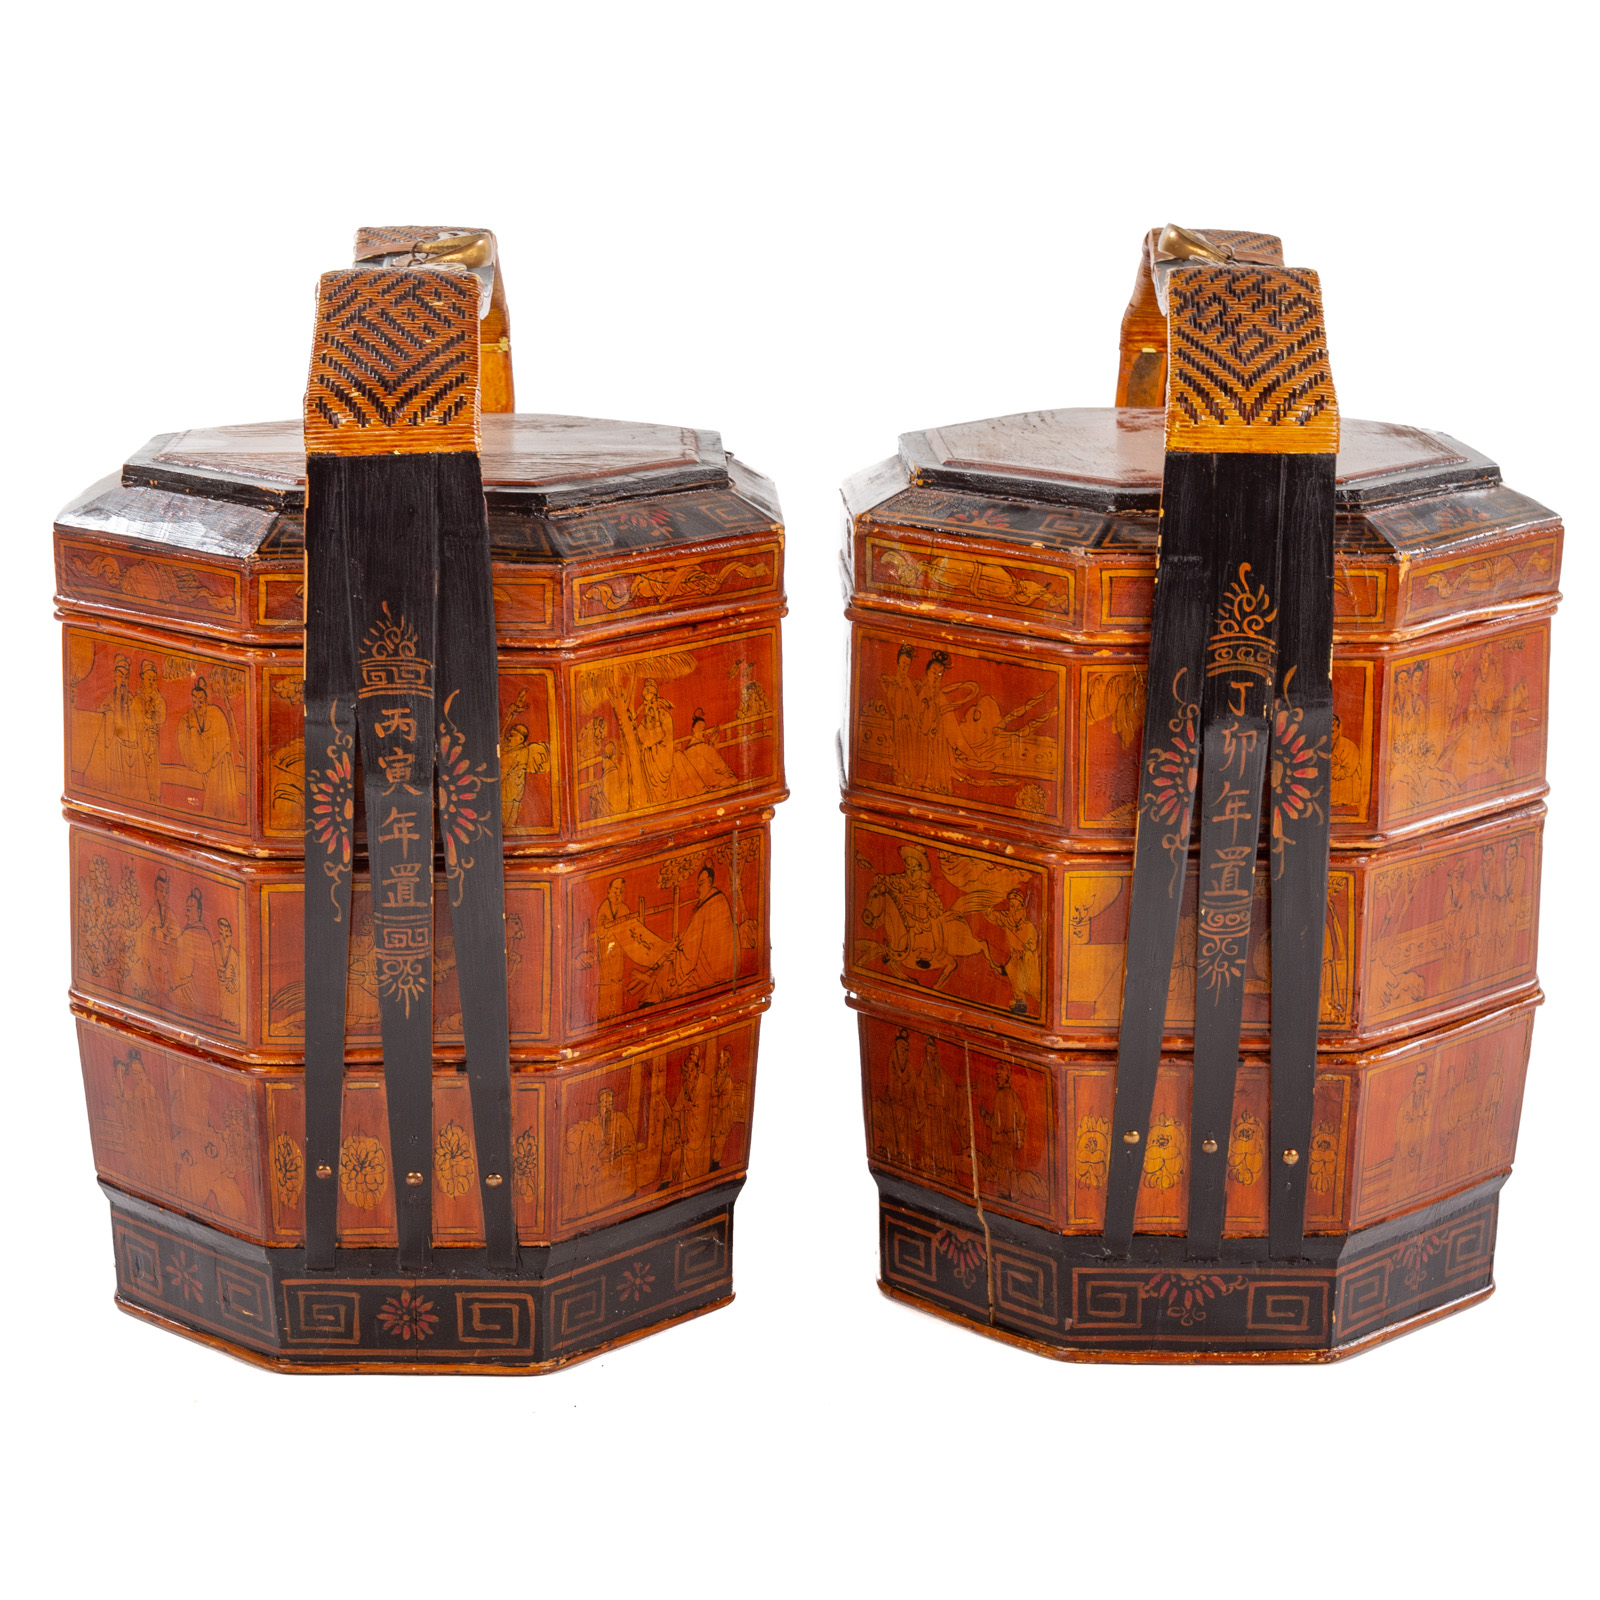 A PAIR OF CHINESE STACKING LACQUER